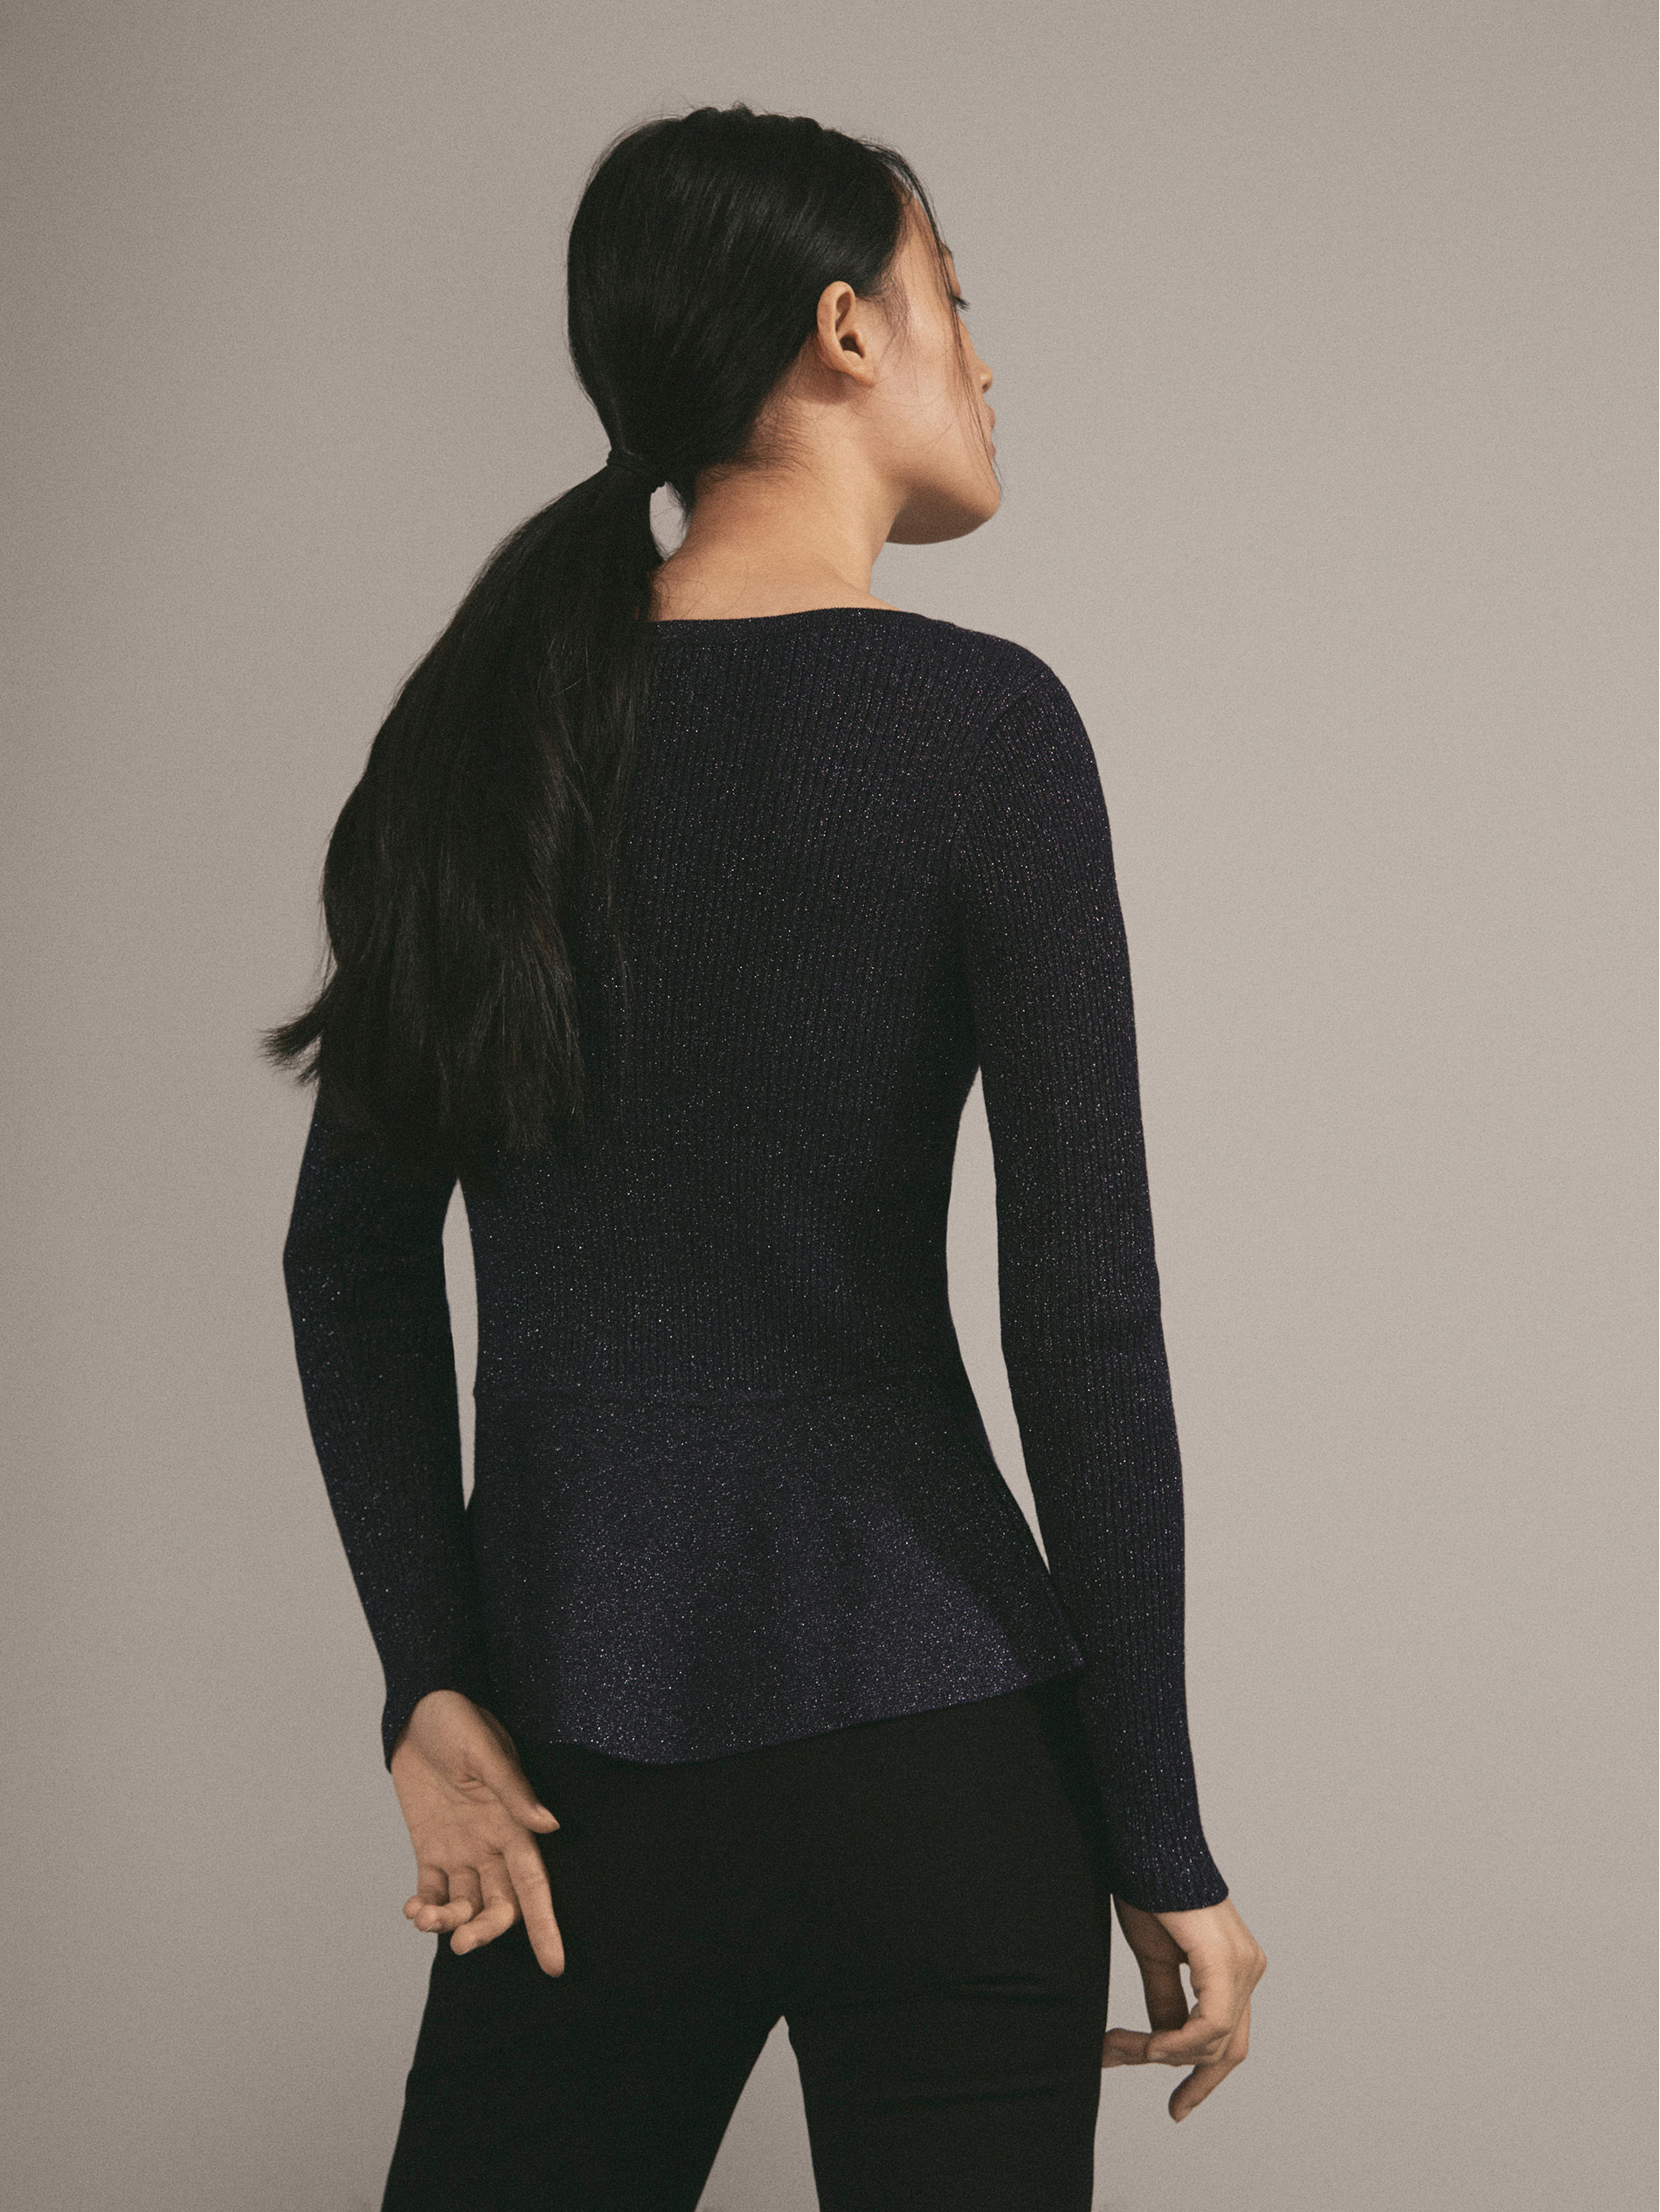 Massimo Dutti SPARKLY RIBBED PEPLUM SWEATER at £34.95 | love the brands